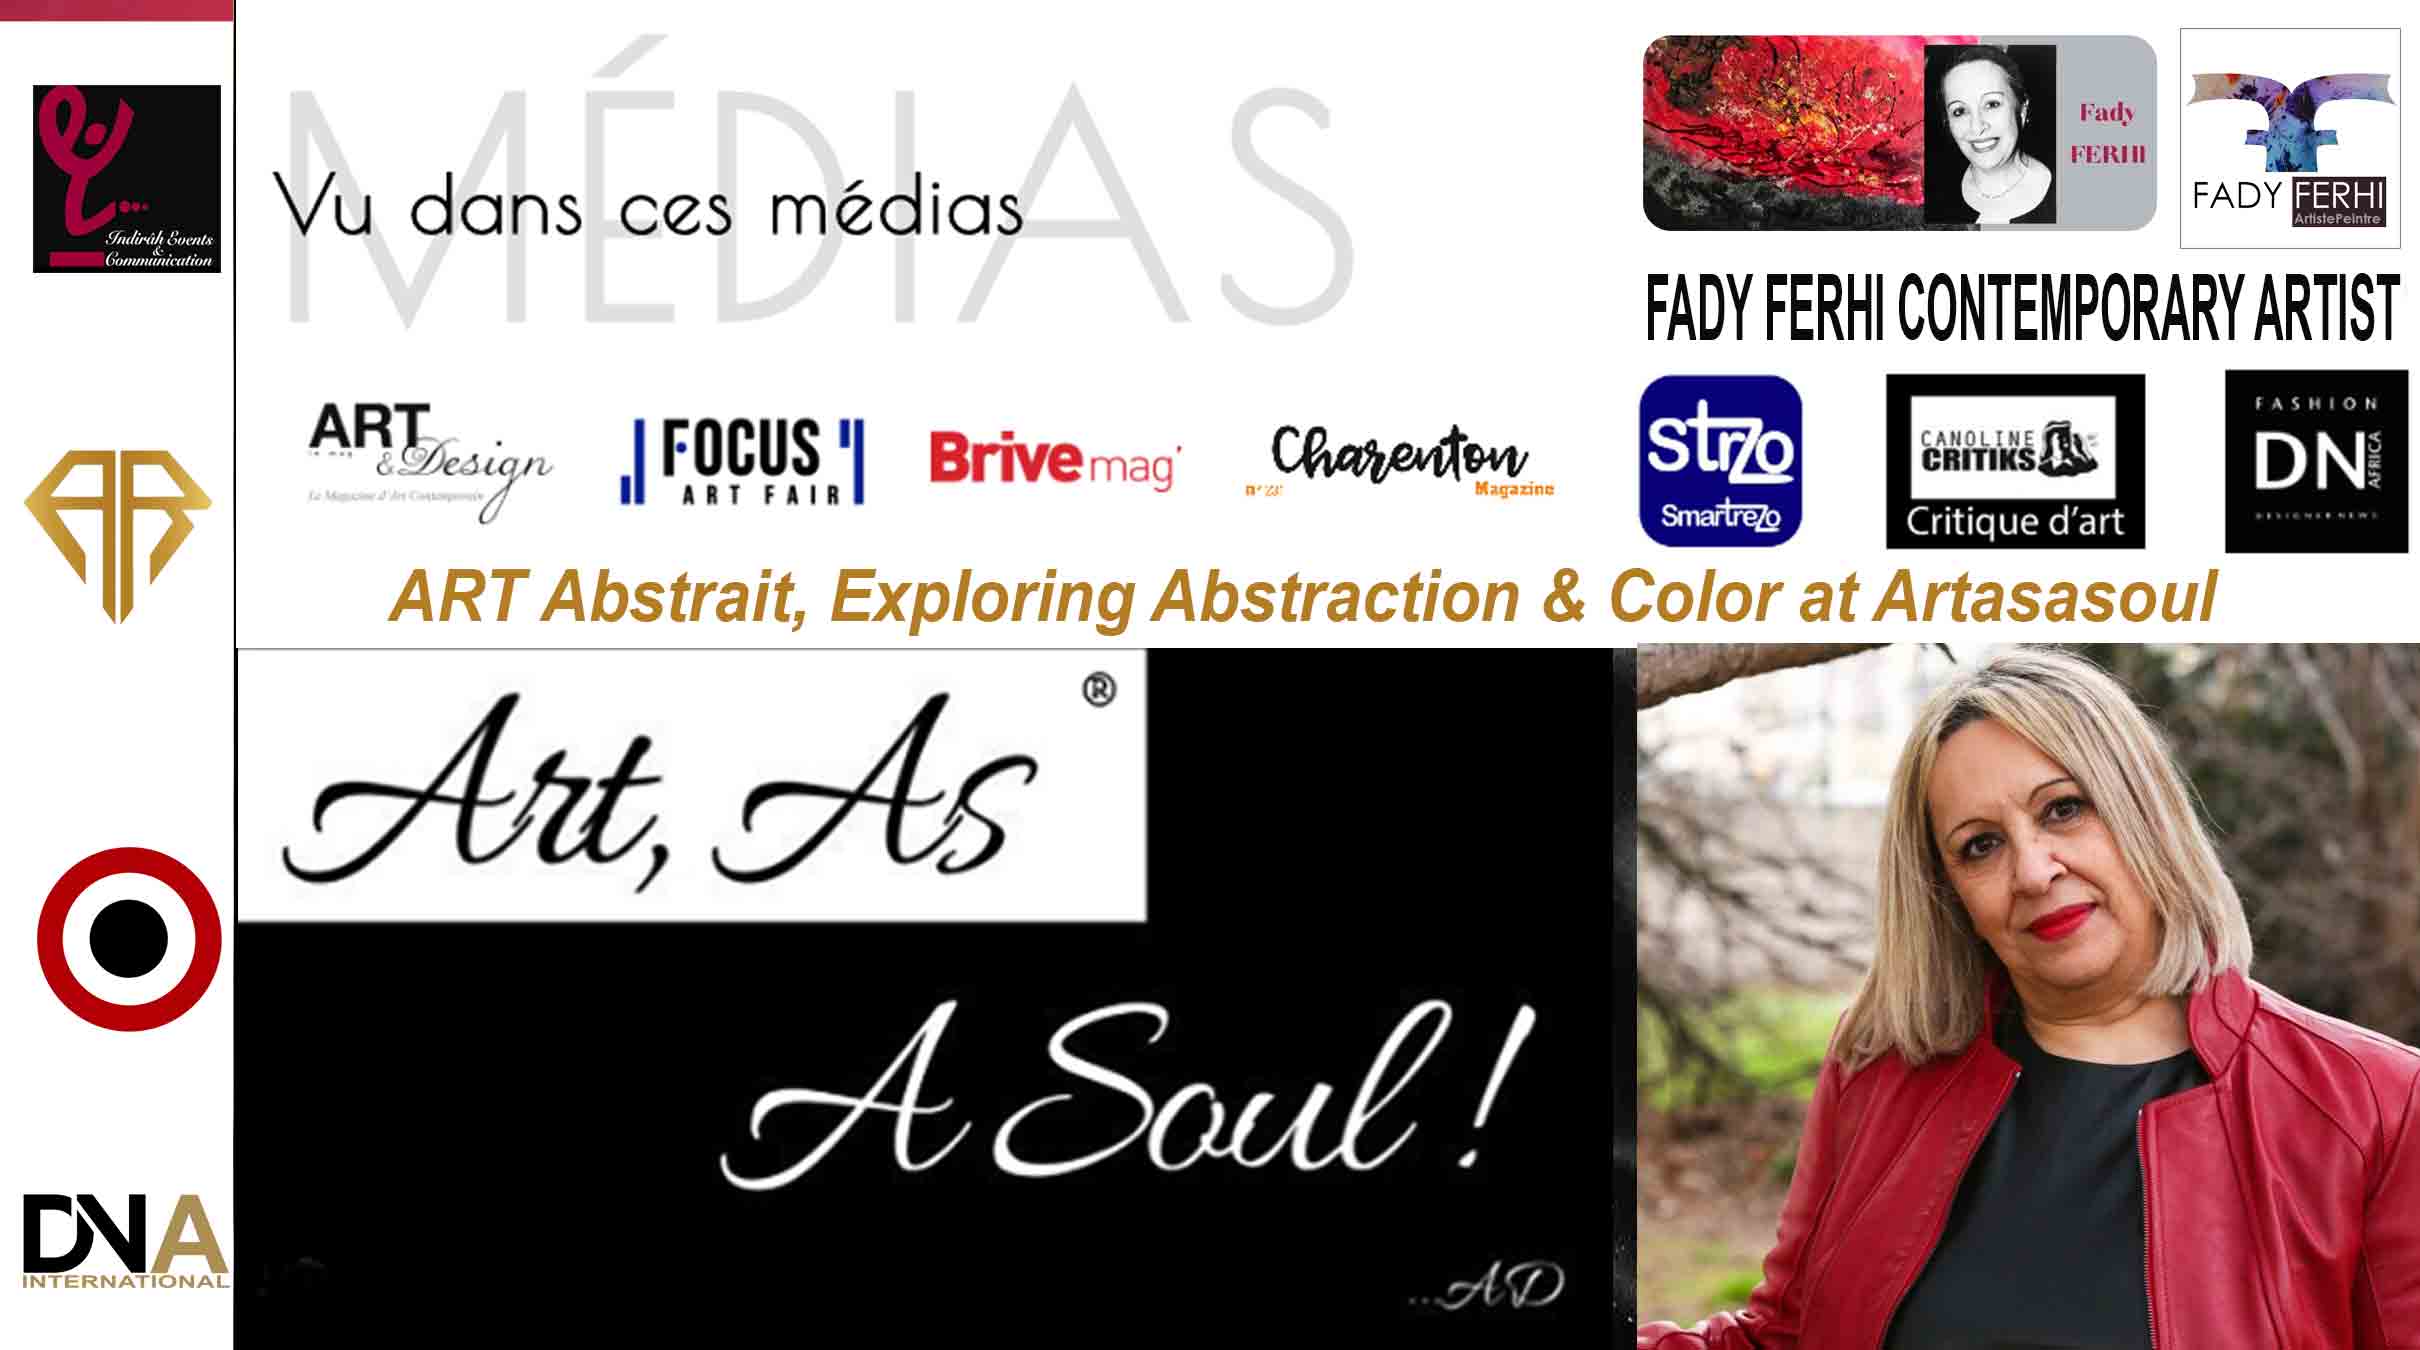 AFRICA-VOGUE-FADY-FERHI-CONTEMPORARY-ARTIST-ART-ABSTRAIT,-Exploring-Abstraction-&-Color-at-Artasasoul -DN-AFRICA-MEDIA-PARTNER